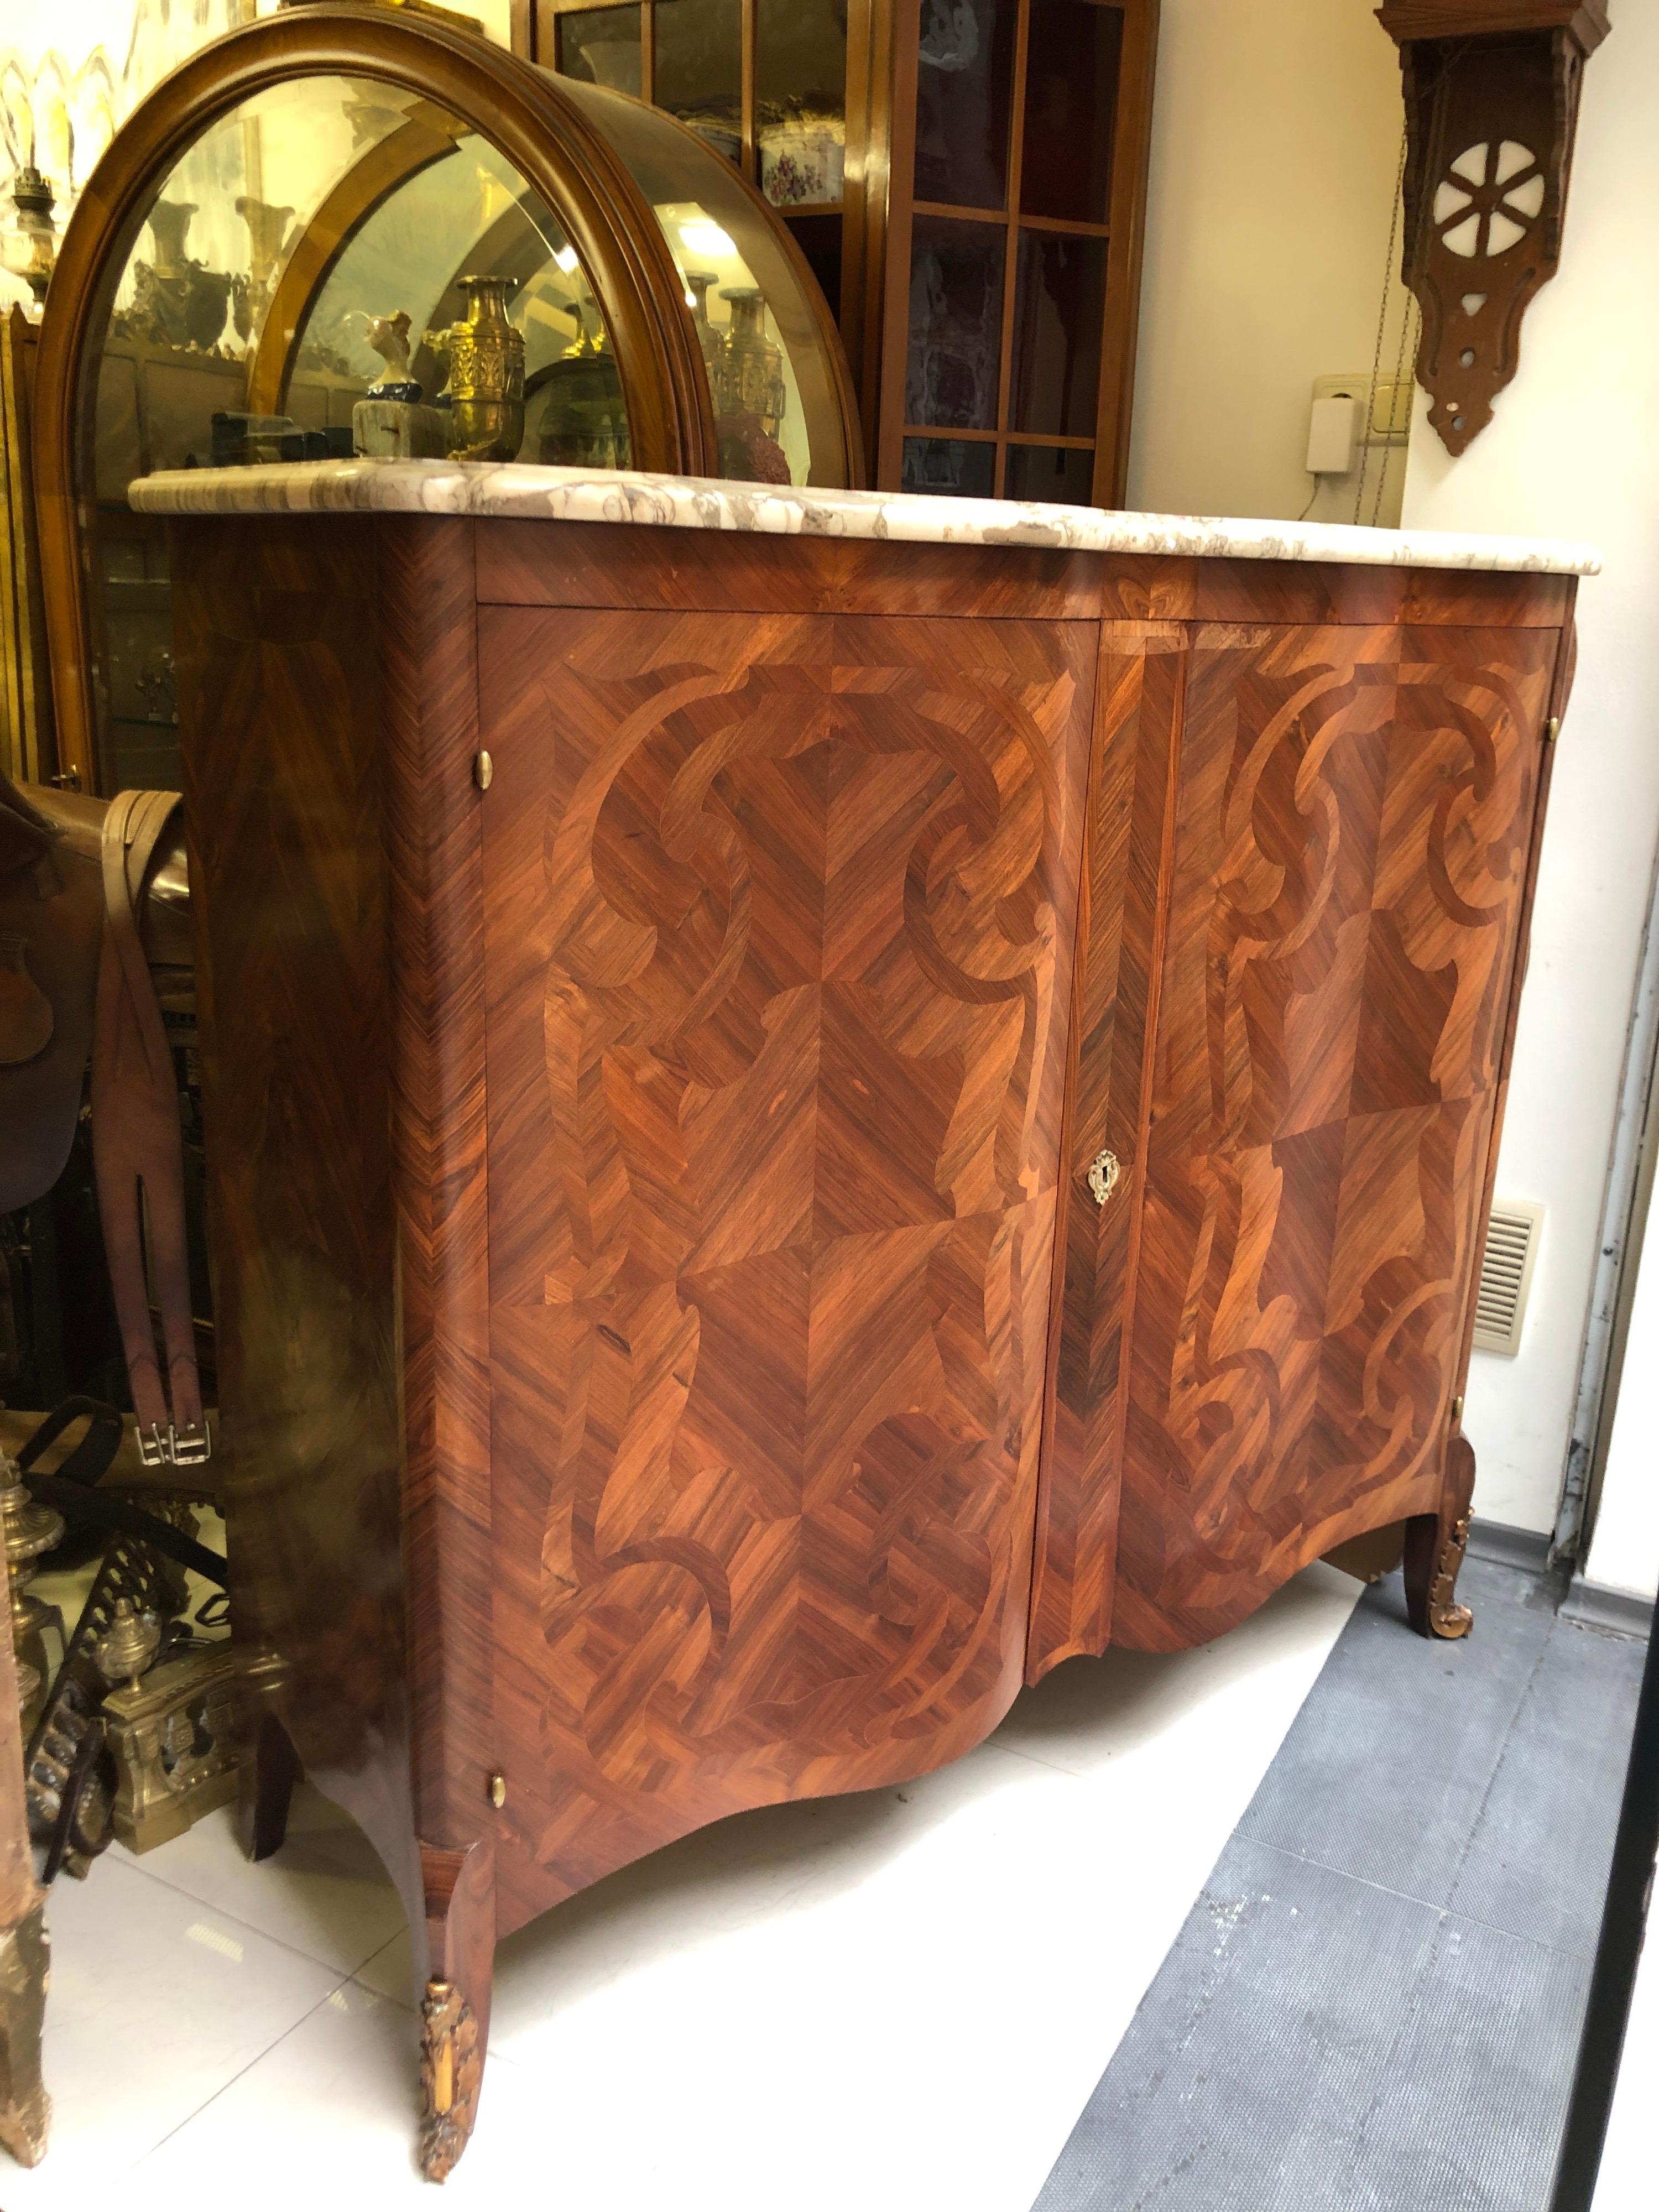 Rare as a decoration and shape this large serpentine commode made of fine quality mahogany will be a perfect accent in any style of home interior. The marble top is in very good condition and duplicates perfectly the shape of the doors. There are